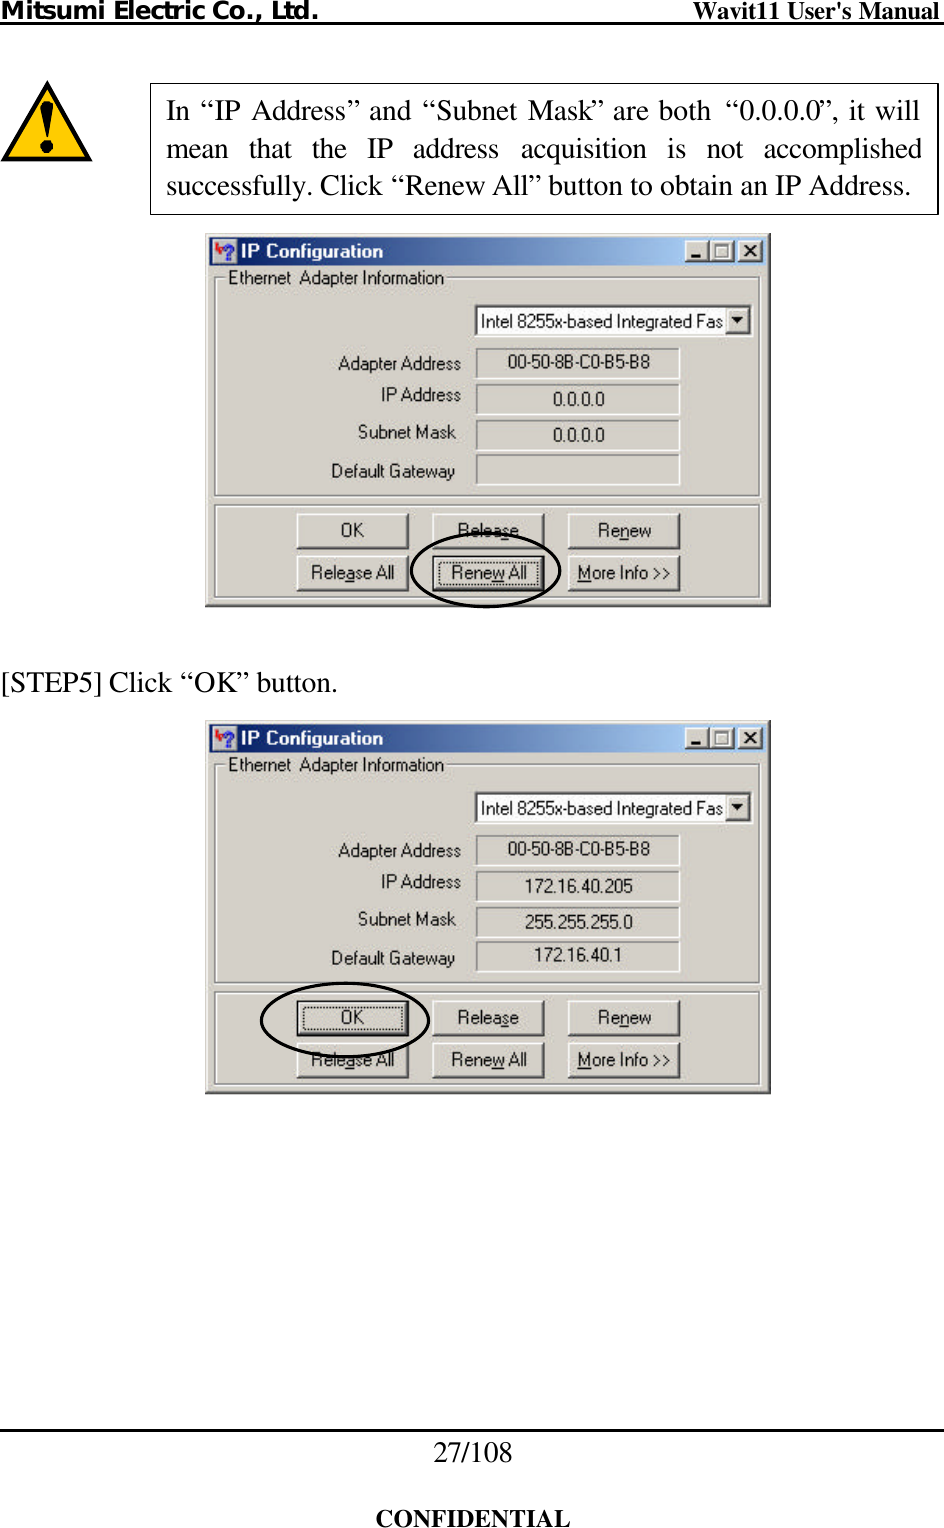 Mitsumi Electric Co., Ltd.                              Wavit11 User&apos;s Manual 27/108  CONFIDENTIAL       [STEP5] Click “OK” button.    In  “IP Address” and “Subnet Mask” are both  “0.0.0.0”, it will mean that the IP address acquisition is not accomplished successfully. Click “Renew All” button to obtain an IP Address. 